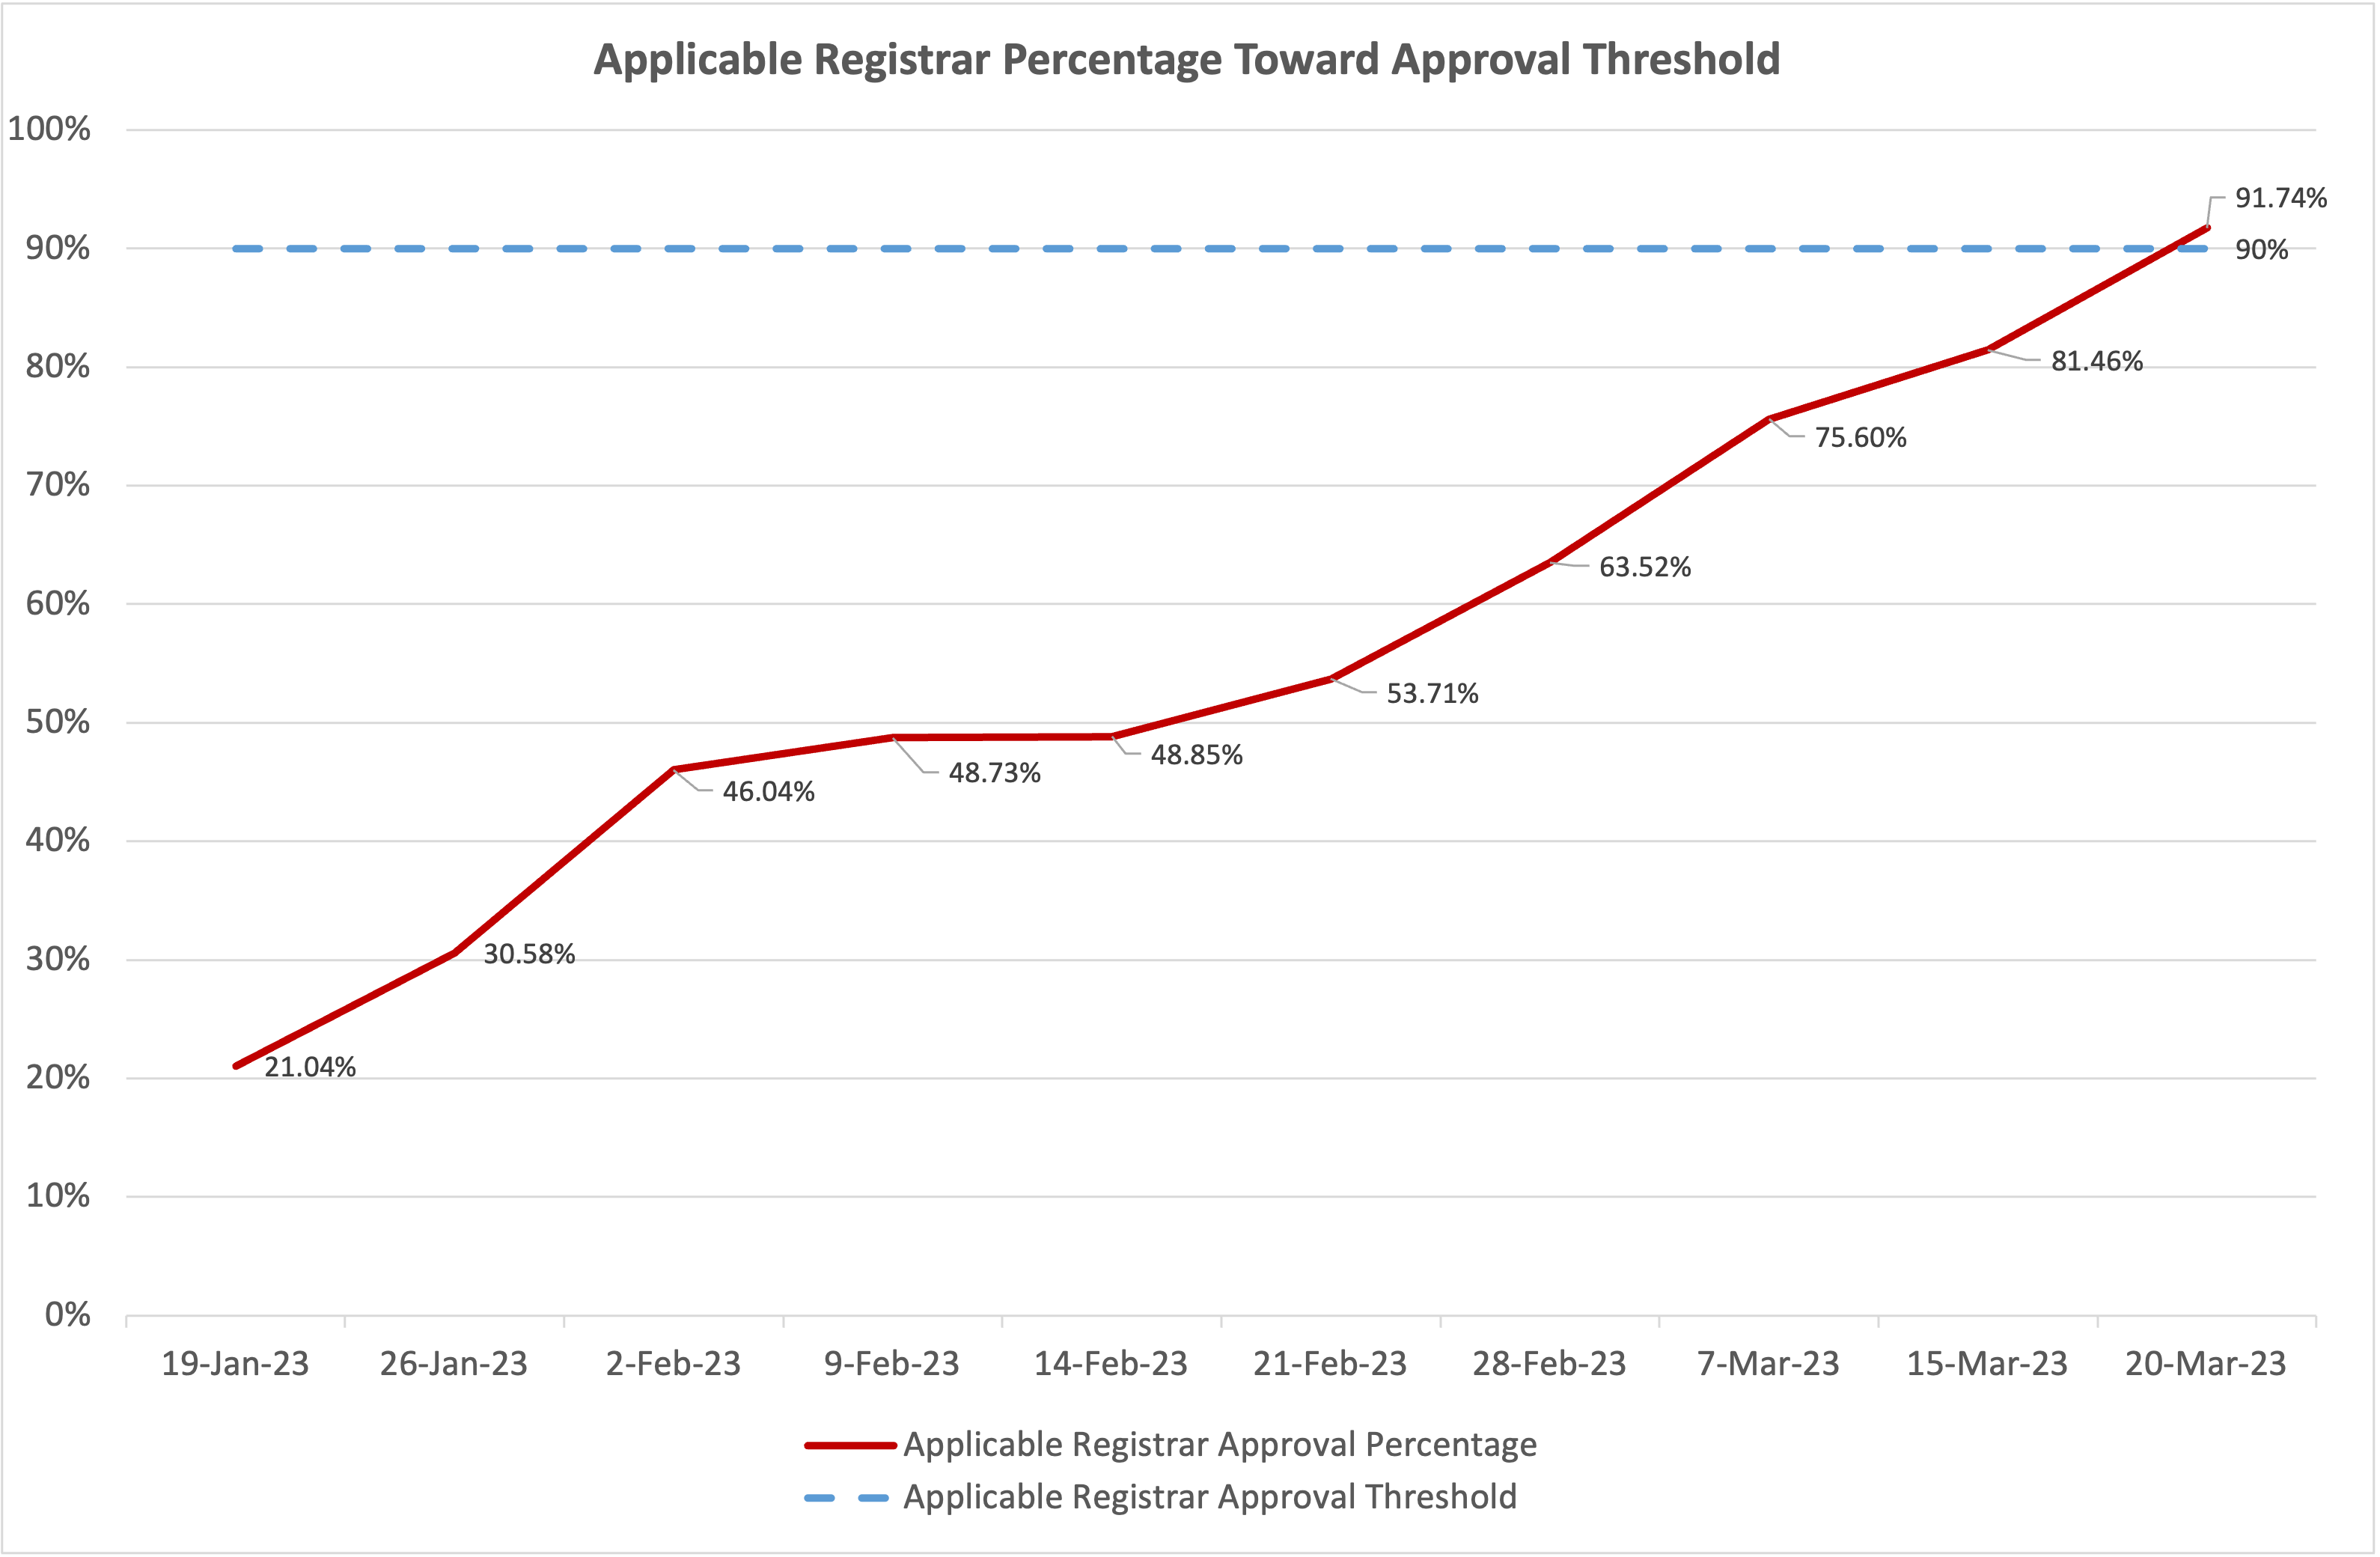 Line chart of the progress of the vote over time towards the affirmative approval of the percentage of total domain names under management (TDUMs) threshold for Applicable Registrars. The TDUMs approval threshold is 90%. As of 20th of March 2023, the affirmative votes towards the threshold is 91.74% - an increase from the 81.46% of affirmative votes reported on the 15th of March 2023.